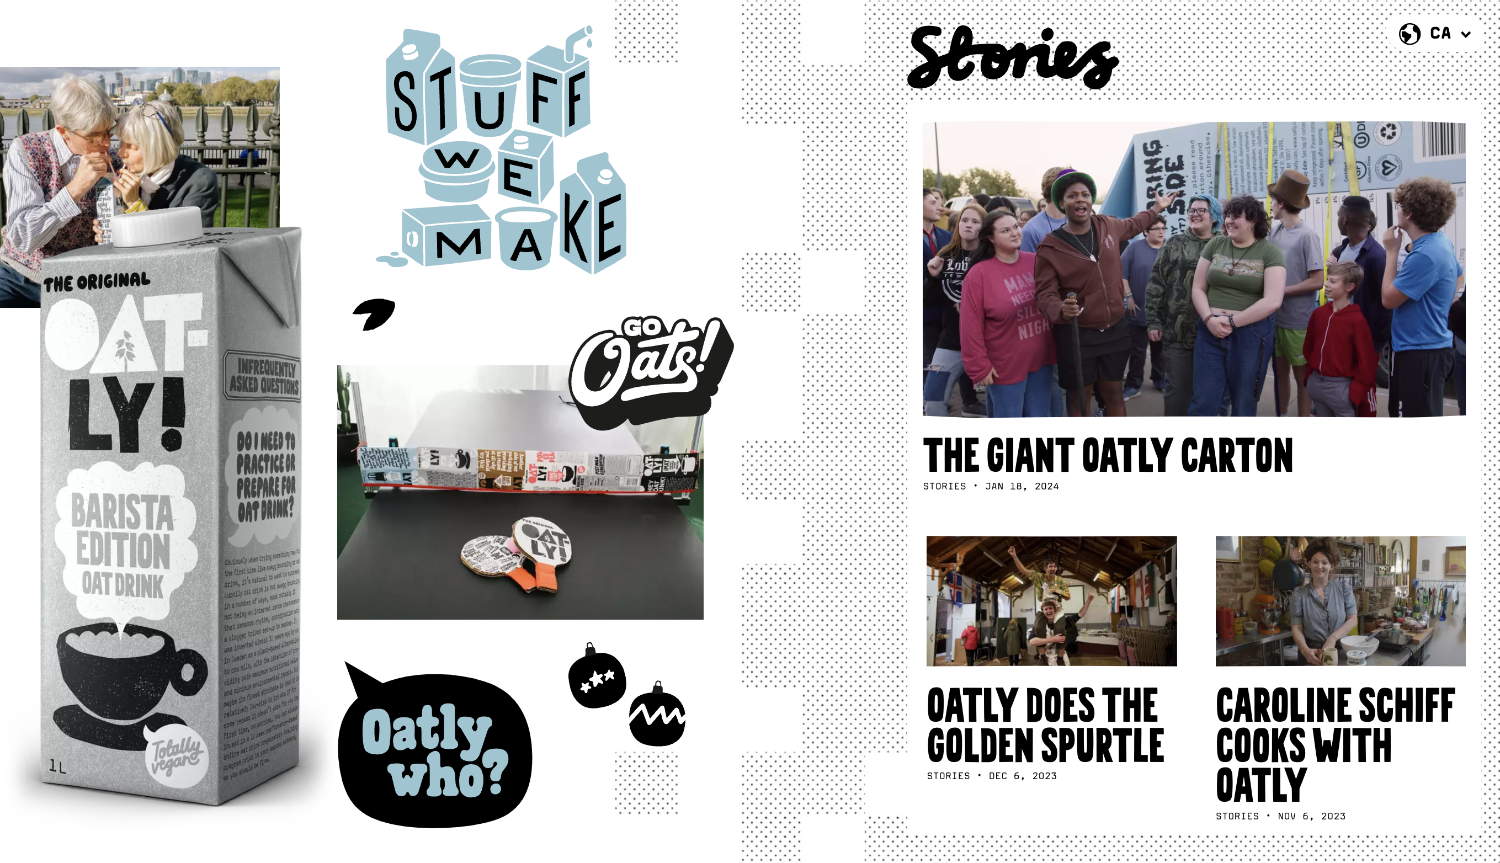 An ecommerce page from Oatly brand's website